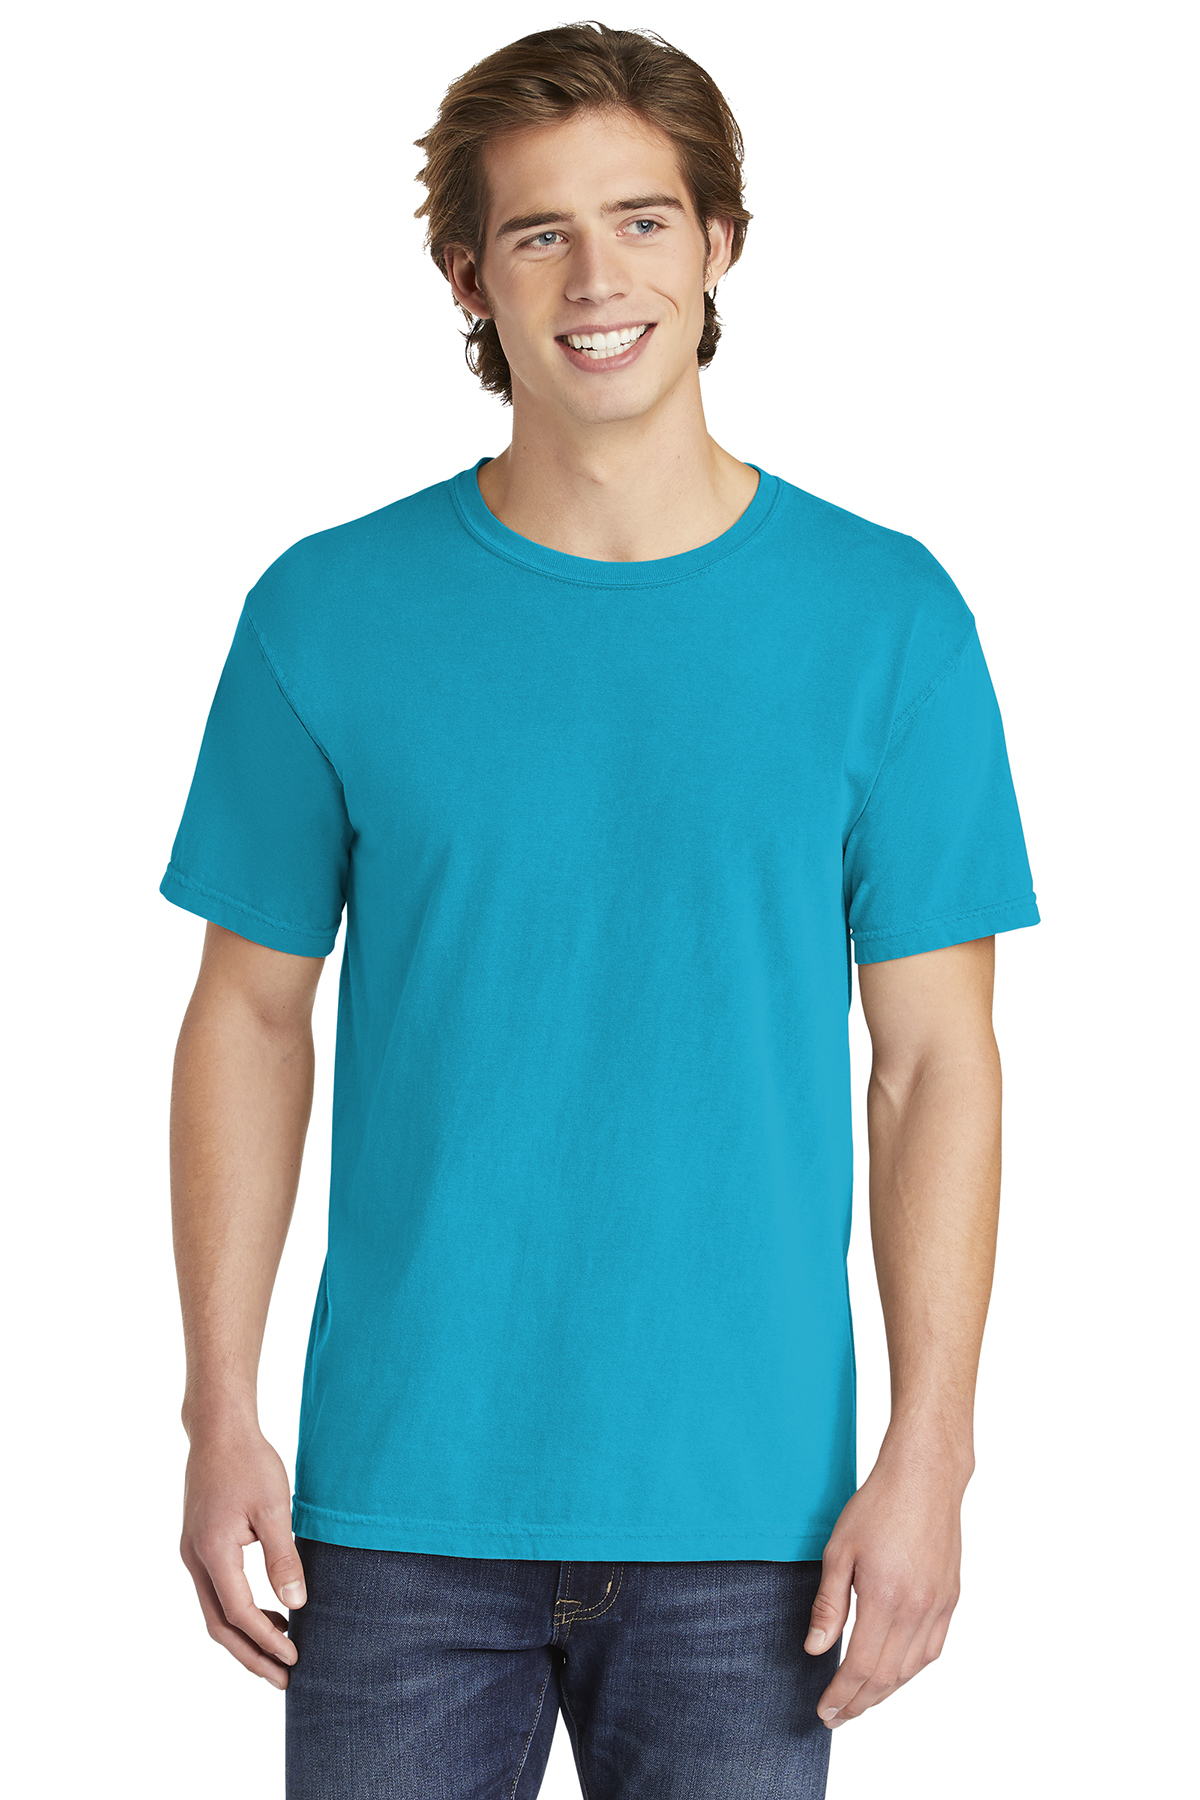 Comfort Colors Heavyweight Ring Spun Tee | Product | Company Casuals